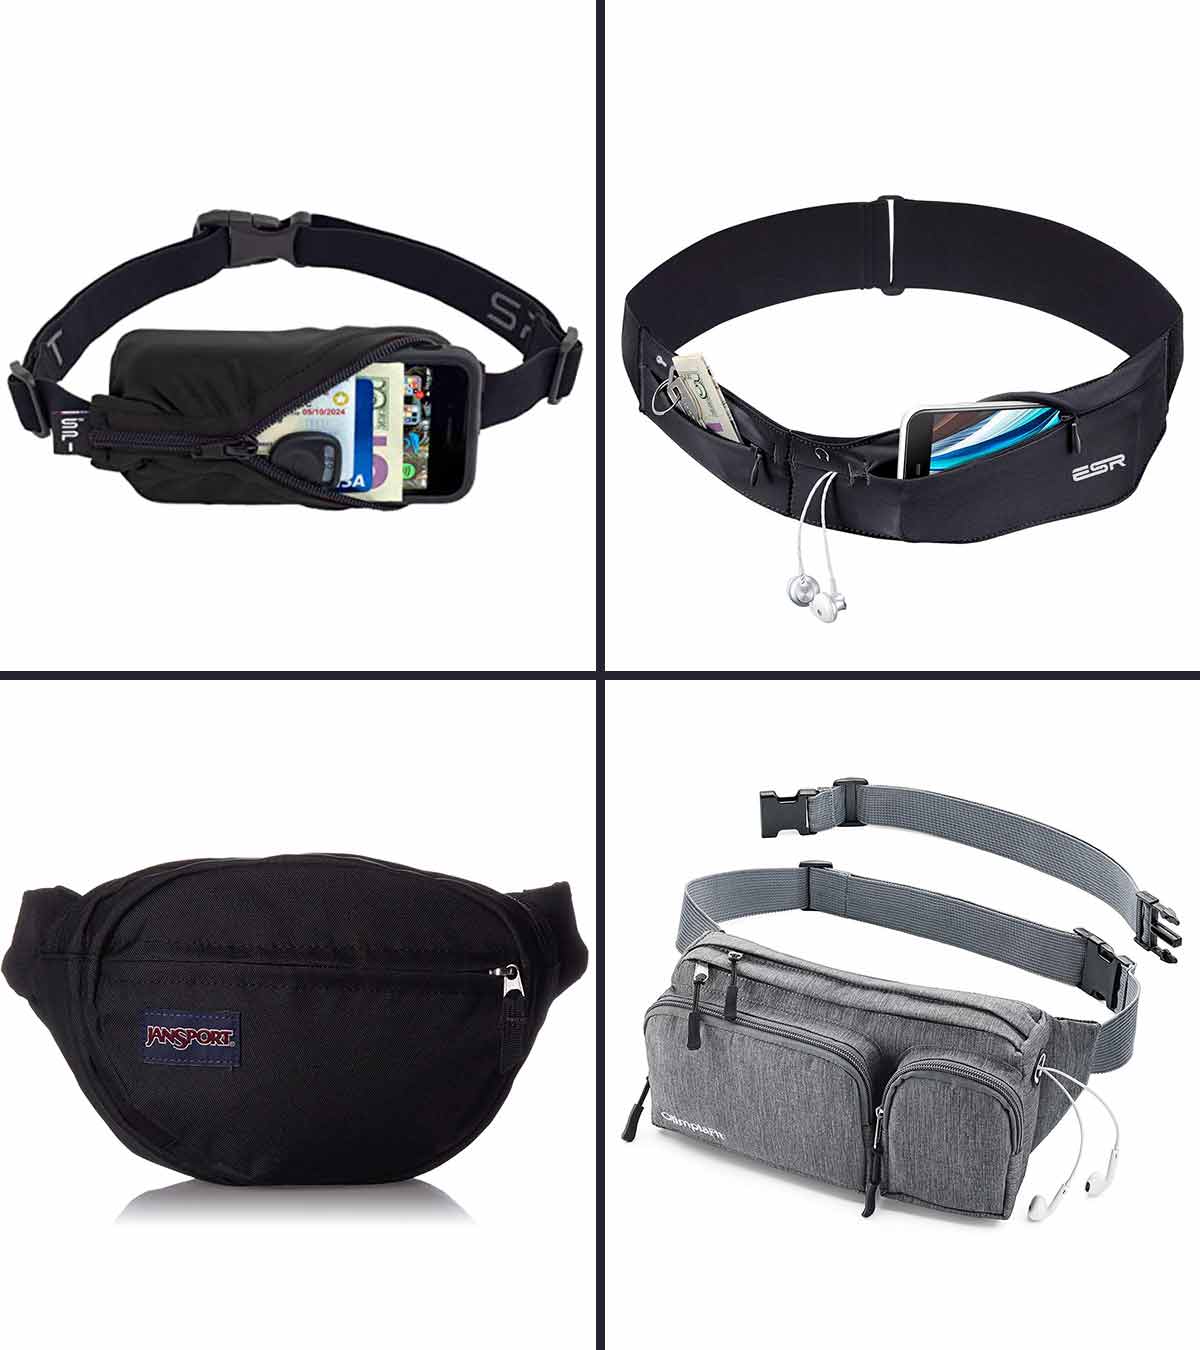 Spanwell Waist Bag Angry Pan Fanny Pack Stealth Travel bum Bags Running Pocket For Men Women